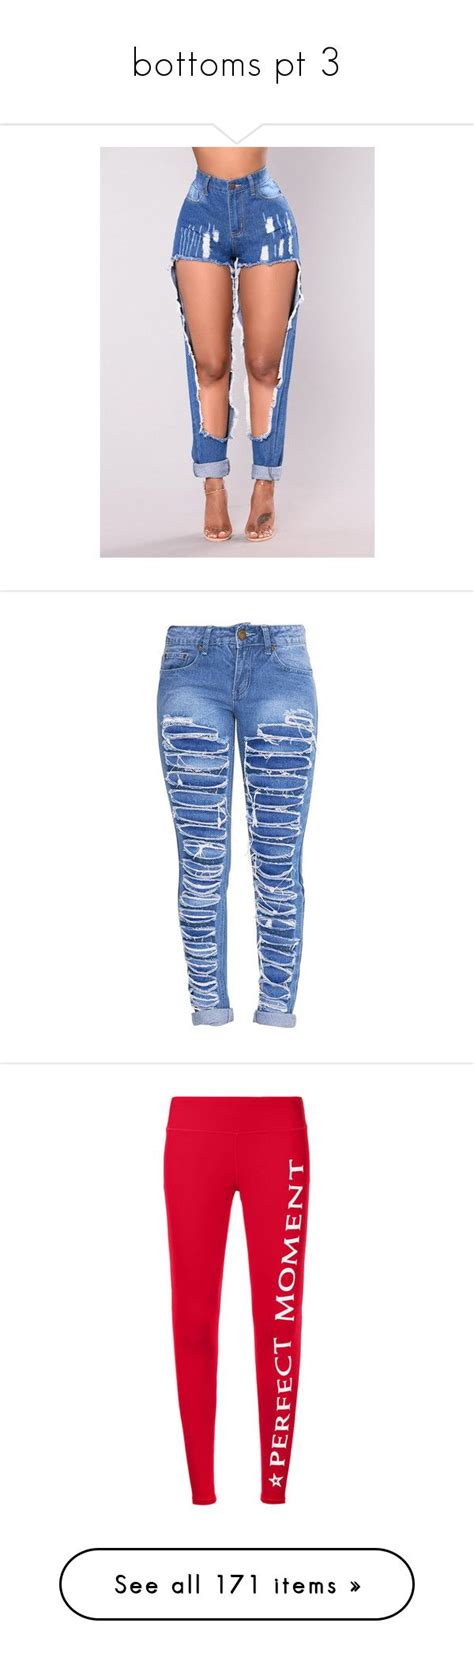 Bottoms Pt By Issaxmonea Liked On Polyvore Featuring Jeans